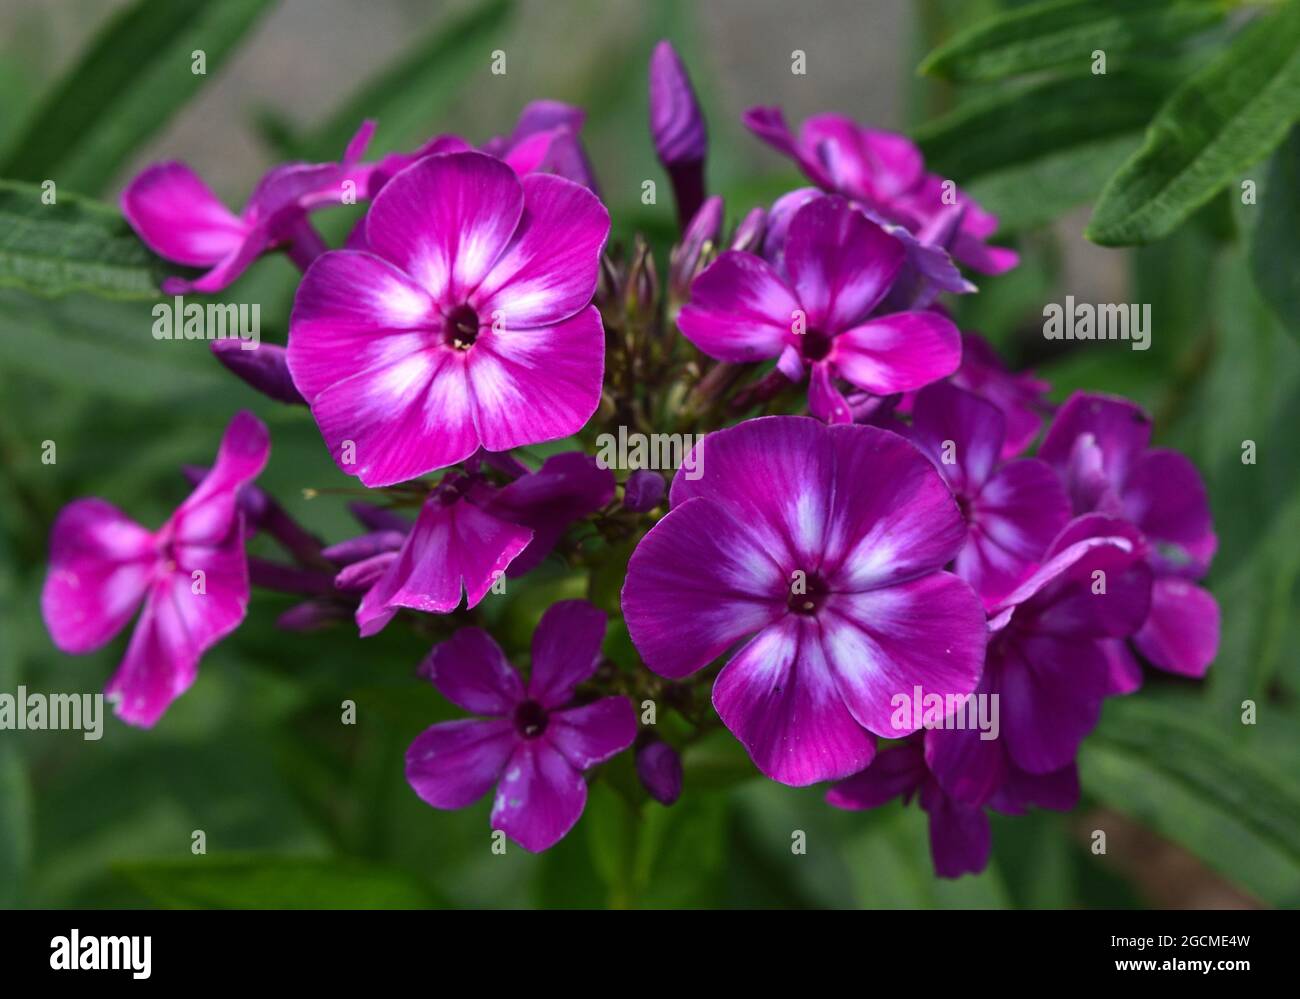 Purple phlox flowers with white centers. Stock Photo